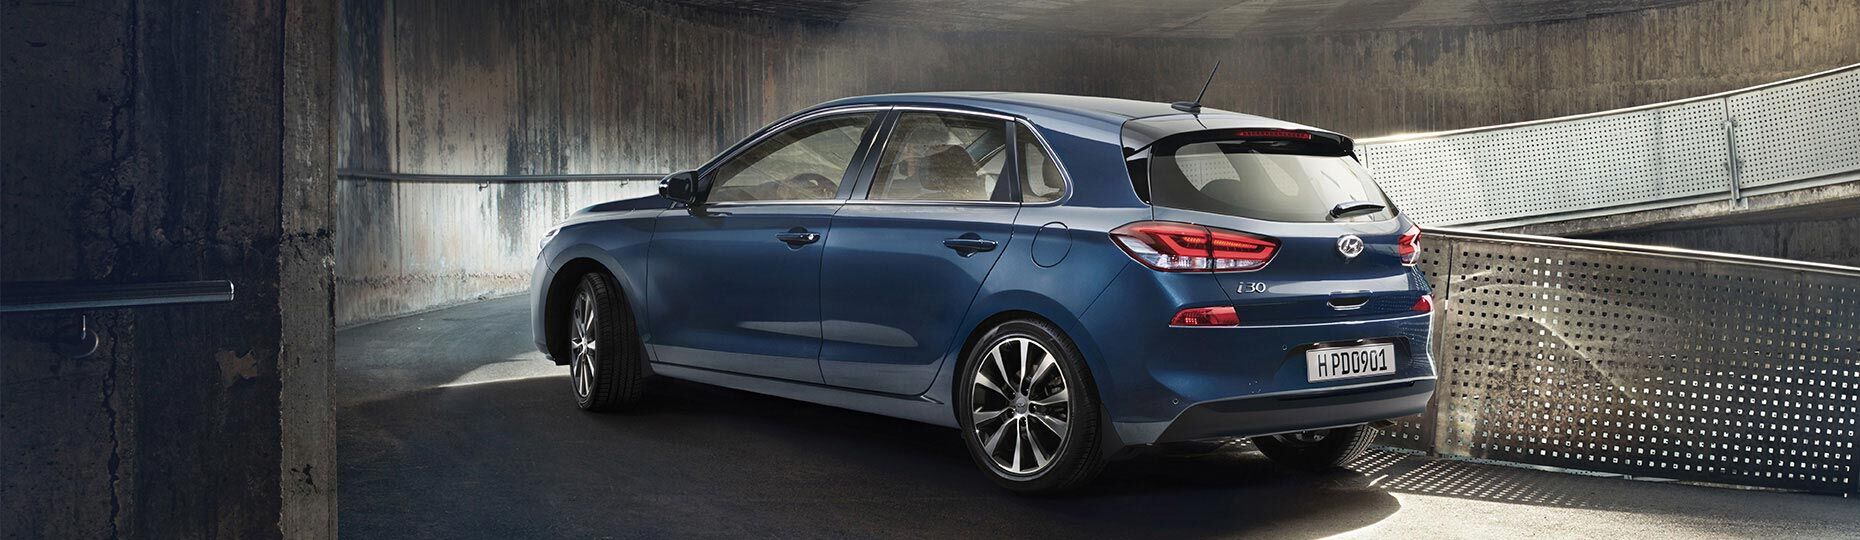 Left side rear view of blue i30 on the uphill road